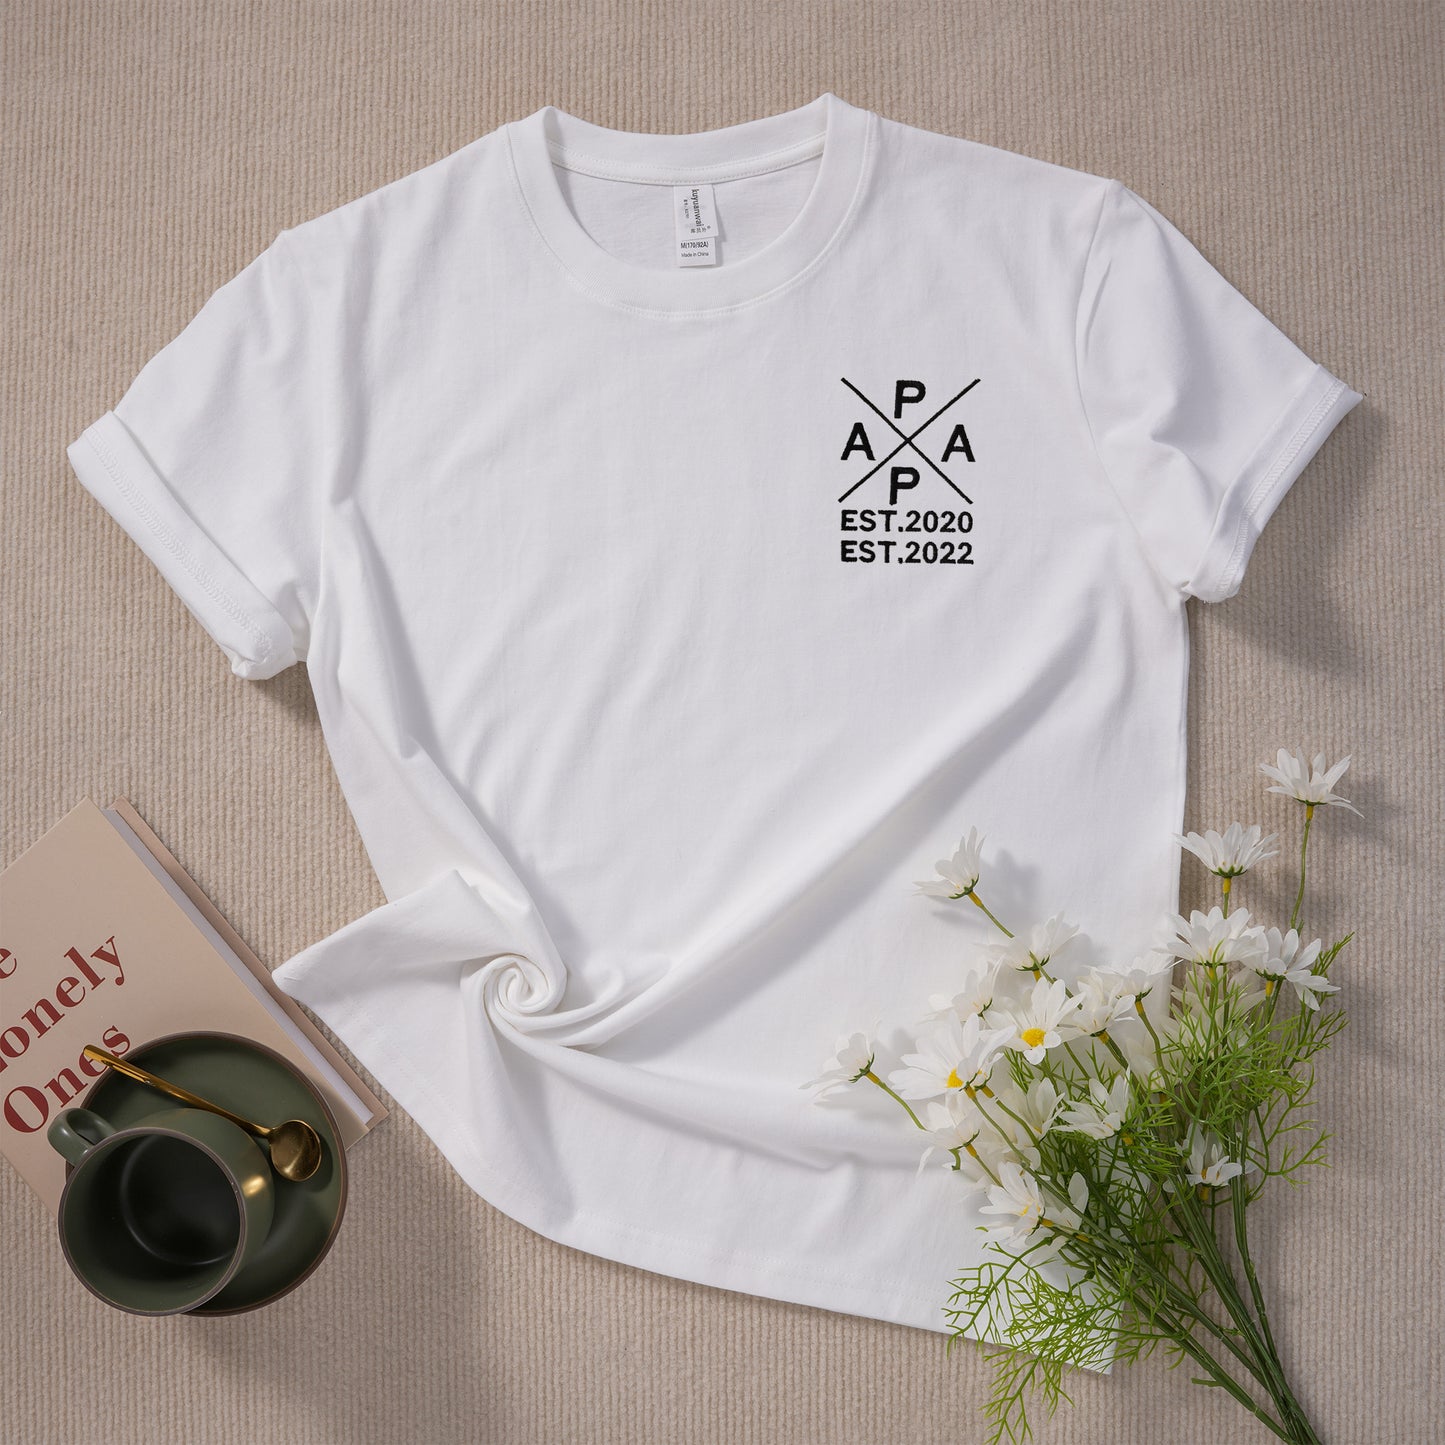 Special customized embroidered T-shirt for Father's Day, gift for dad